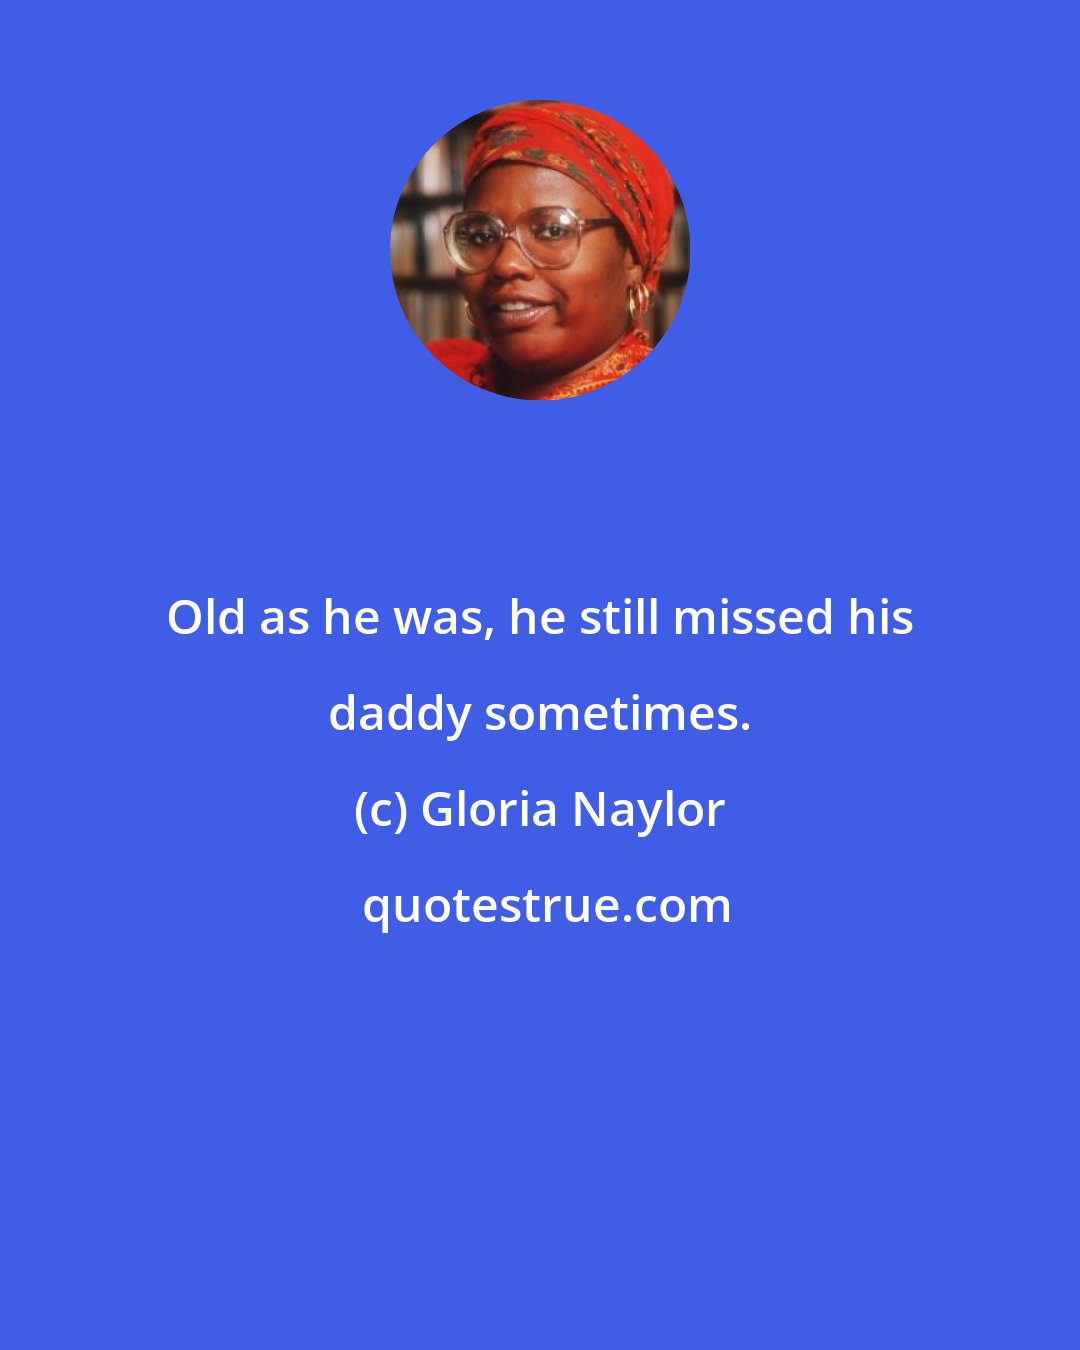 Gloria Naylor: Old as he was, he still missed his daddy sometimes.